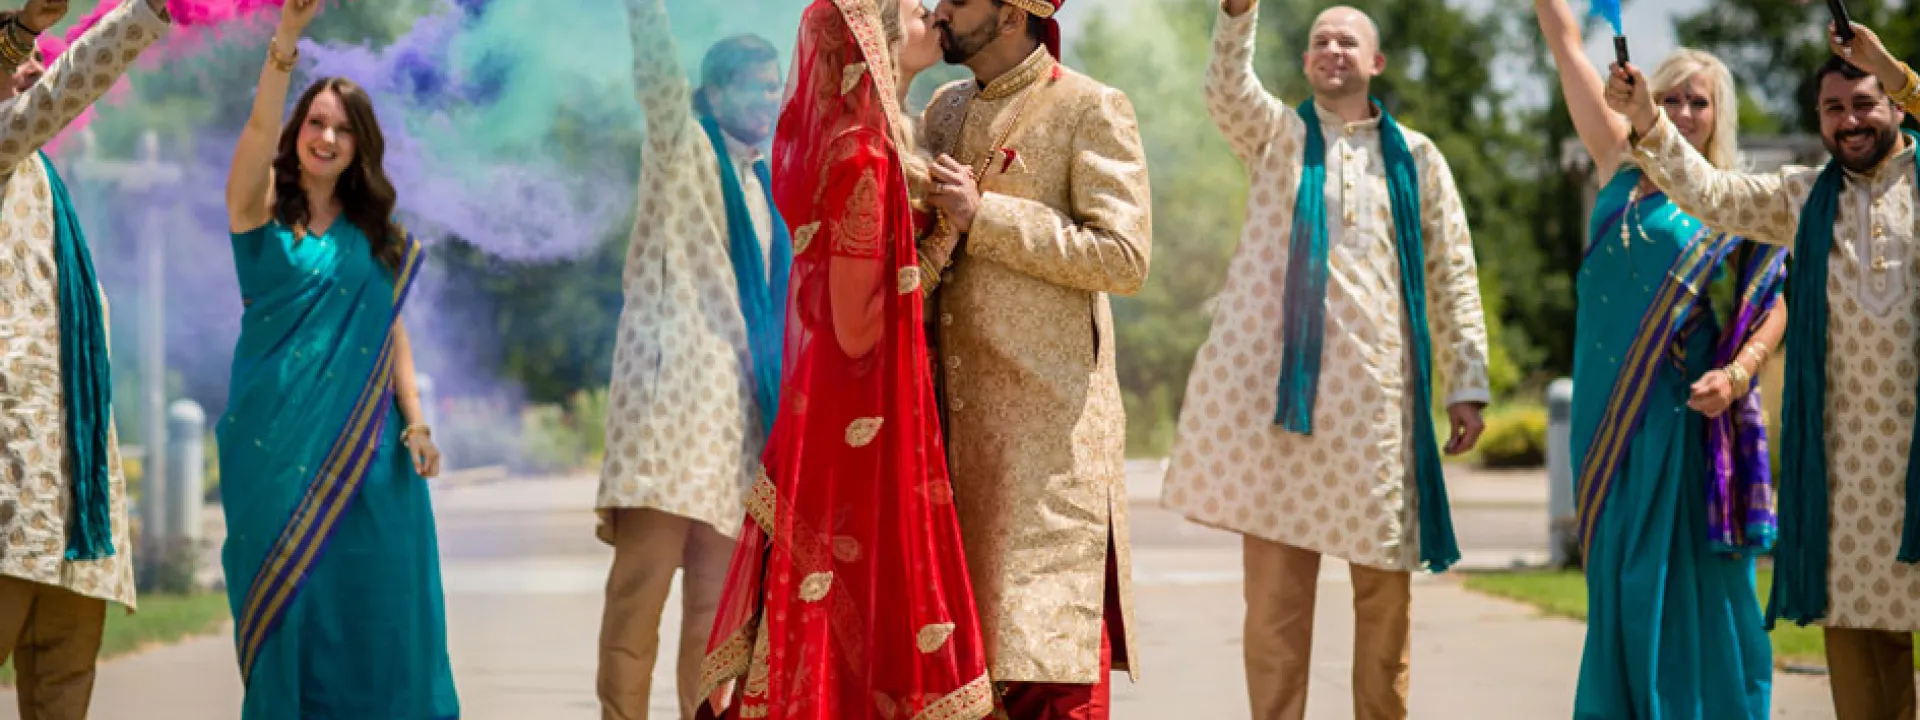 Hindu and Christian ceremonies, celebrated with bursts of color, in honor of one couple's love